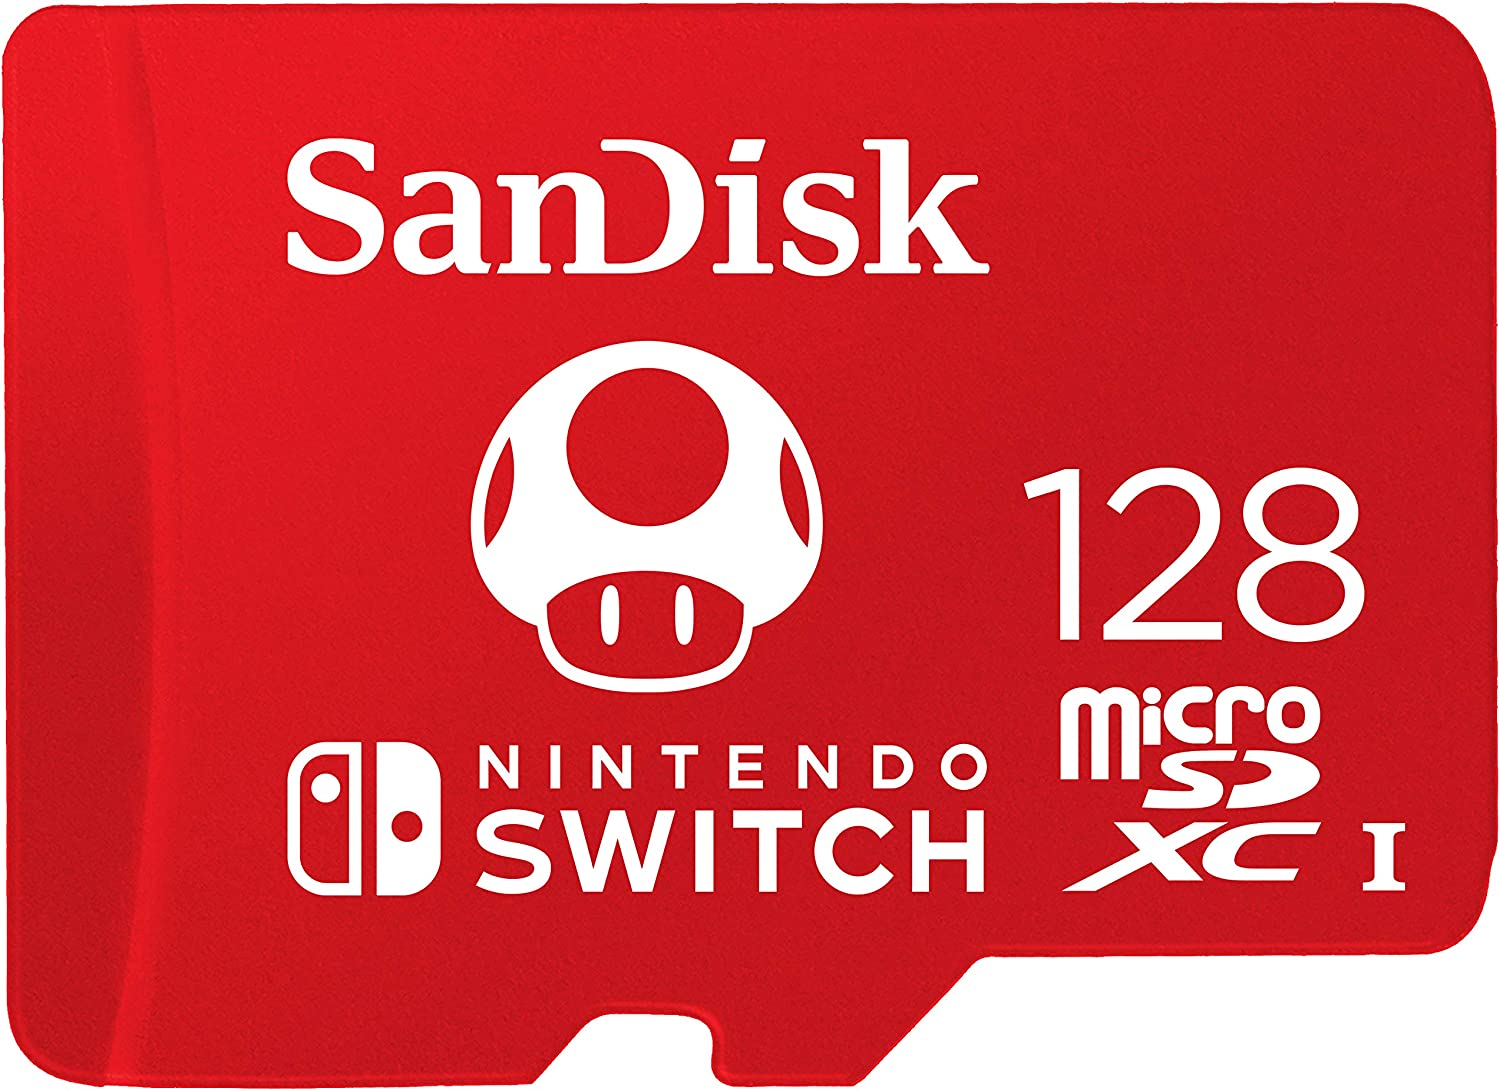 SanDisk Mario microSD Card for Nintendo Switch (128GB) slashed by 50%